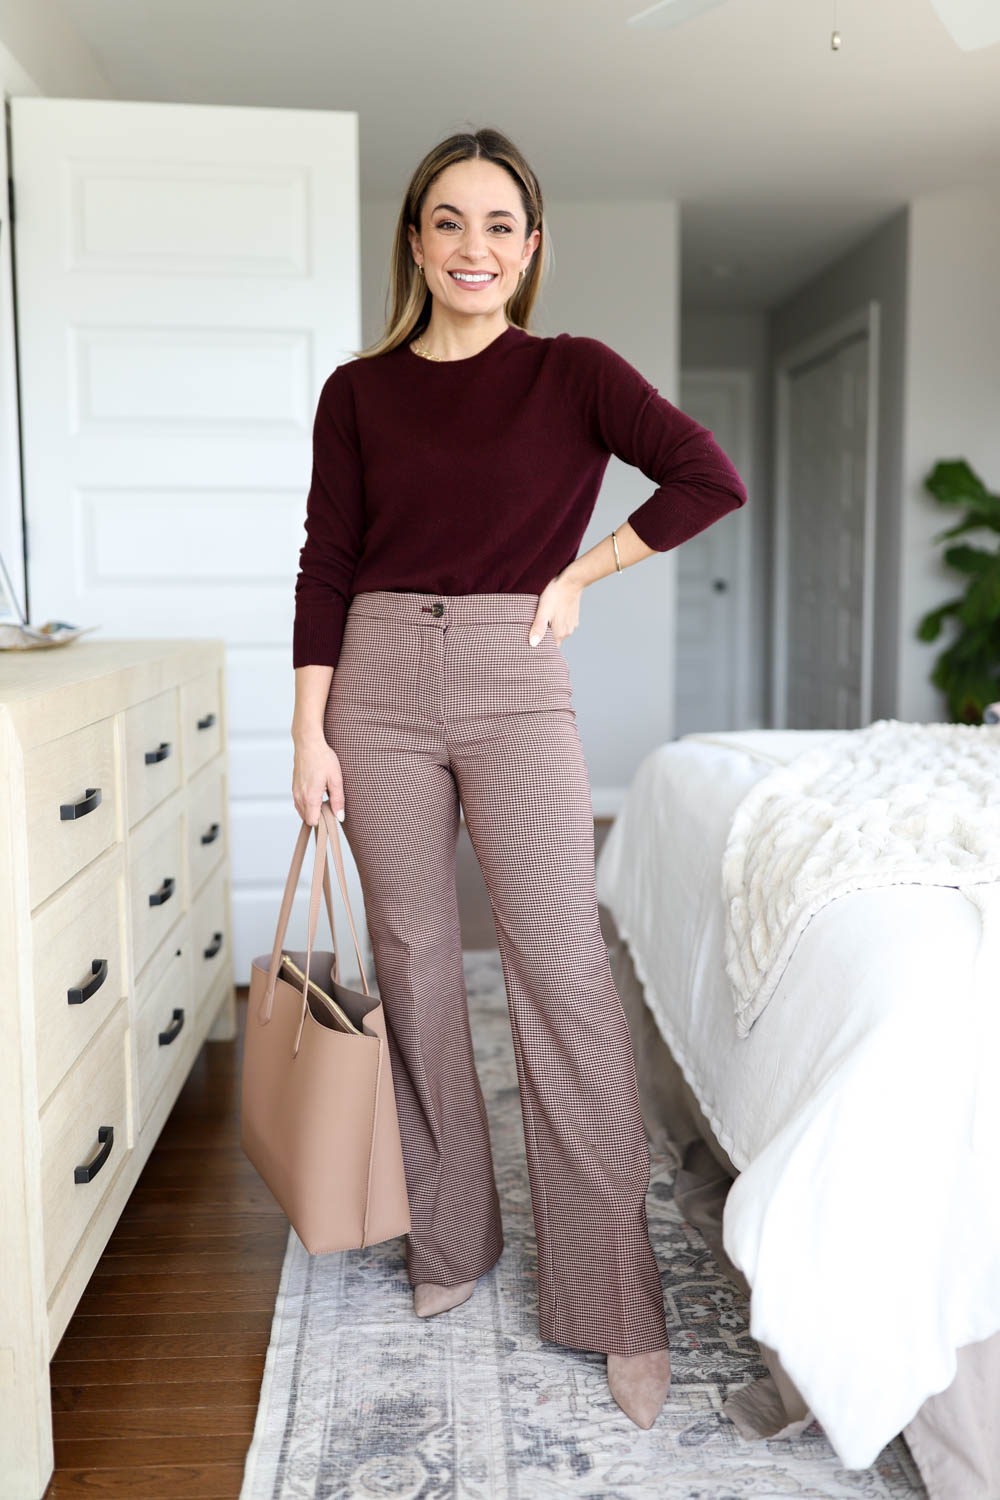 Warm Winter Outfits for Work - Pumps & Push Ups